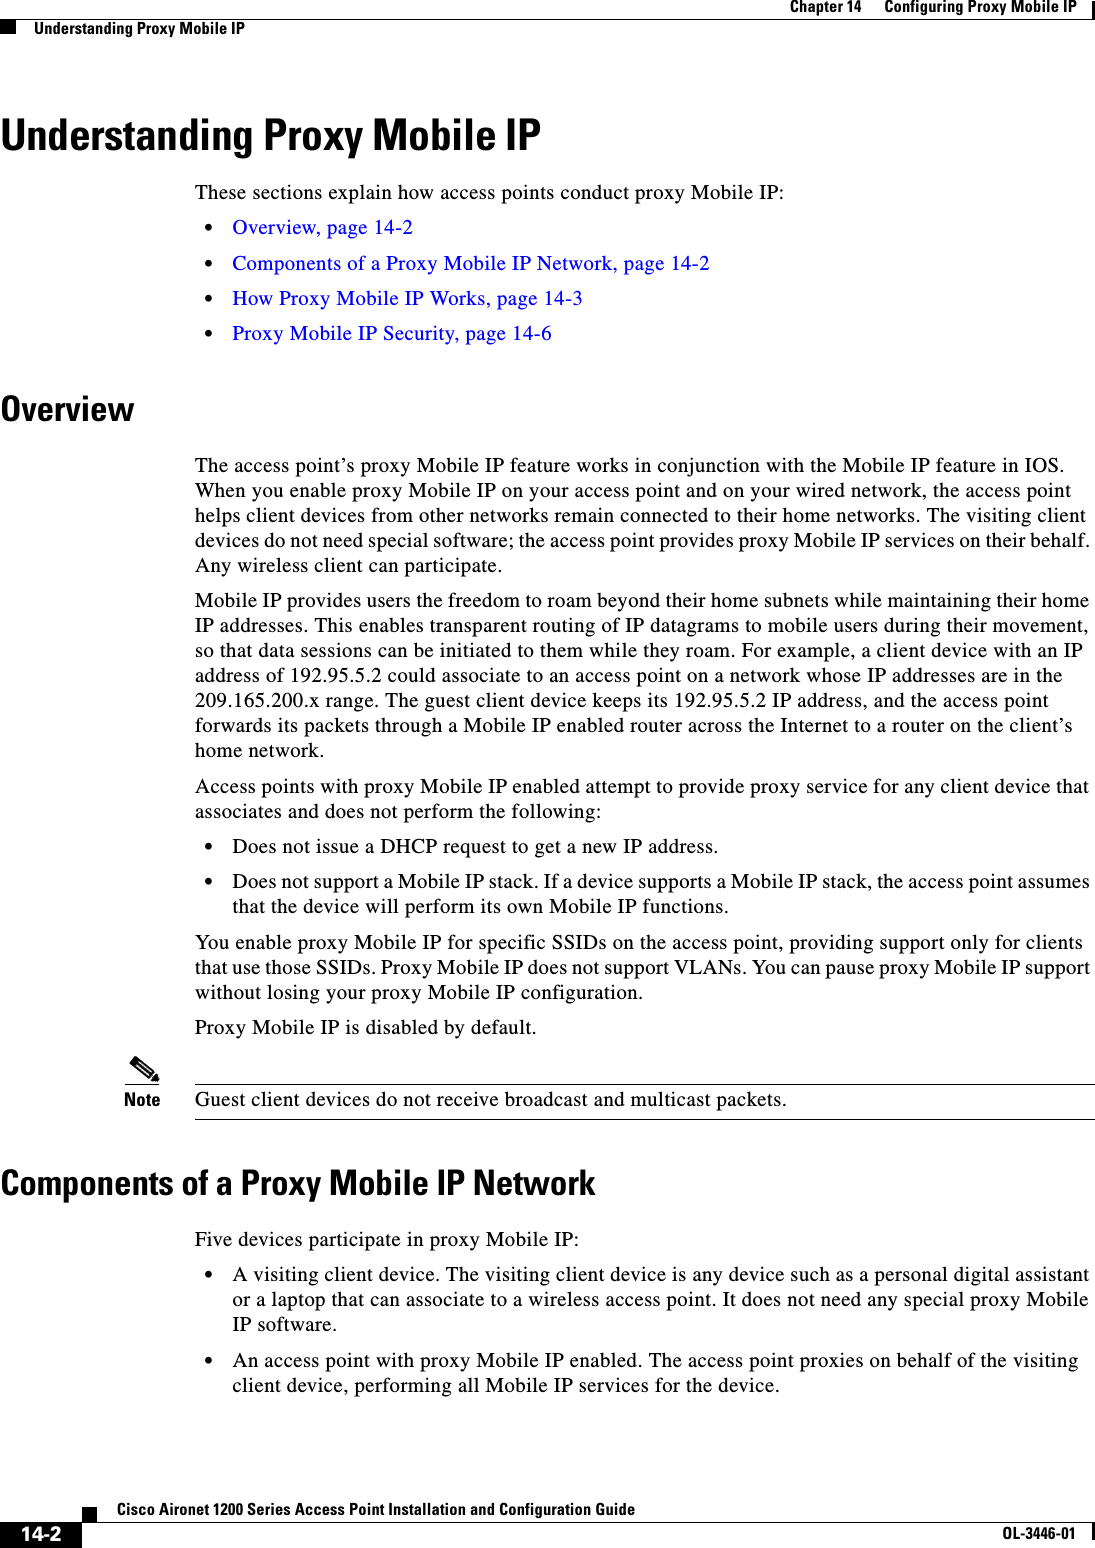 14-2Cisco Aironet 1200 Series Access Point Installation and Configuration GuideOL-3446-01Chapter 14      Configuring Proxy Mobile IPUnderstanding Proxy Mobile IPUnderstanding Proxy Mobile IPThese sections explain how access points conduct proxy Mobile IP:•Overview, page 14-2•Components of a Proxy Mobile IP Network, page 14-2•How Proxy Mobile IP Works, page 14-3•Proxy Mobile IP Security, page 14-6OverviewThe access point’s proxy Mobile IP feature works in conjunction with the Mobile IP feature in IOS. When you enable proxy Mobile IP on your access point and on your wired network, the access point helps client devices from other networks remain connected to their home networks. The visiting client devices do not need special software; the access point provides proxy Mobile IP services on their behalf. Any wireless client can participate.Mobile IP provides users the freedom to roam beyond their home subnets while maintaining their home IP addresses. This enables transparent routing of IP datagrams to mobile users during their movement, so that data sessions can be initiated to them while they roam. For example, a client device with an IP address of 192.95.5.2 could associate to an access point on a network whose IP addresses are in the 209.165.200.x range. The guest client device keeps its 192.95.5.2 IP address, and the access point forwards its packets through a Mobile IP enabled router across the Internet to a router on the client’shome network. Access points with proxy Mobile IP enabled attempt to provide proxy service for any client device that associates and does not perform the following:•Does not issue a DHCP request to get a new IP address.•Does not support a Mobile IP stack. If a device supports a Mobile IP stack, the access point assumes that the device will perform its own Mobile IP functions. You enable proxy Mobile IP for specific SSIDs on the access point, providing support only for clients that use those SSIDs. Proxy Mobile IP does not support VLANs. You can pause proxy Mobile IP support without losing your proxy Mobile IP configuration.Proxy Mobile IP is disabled by default.Note Guest client devices do not receive broadcast and multicast packets.Components of a Proxy Mobile IP NetworkFive devices participate in proxy Mobile IP:•A visiting client device. The visiting client device is any device such as a personal digital assistant or a laptop that can associate to a wireless access point. It does not need any special proxy Mobile IP software. •An access point with proxy Mobile IP enabled. The access point proxies on behalf of the visiting client device, performing all Mobile IP services for the device. 